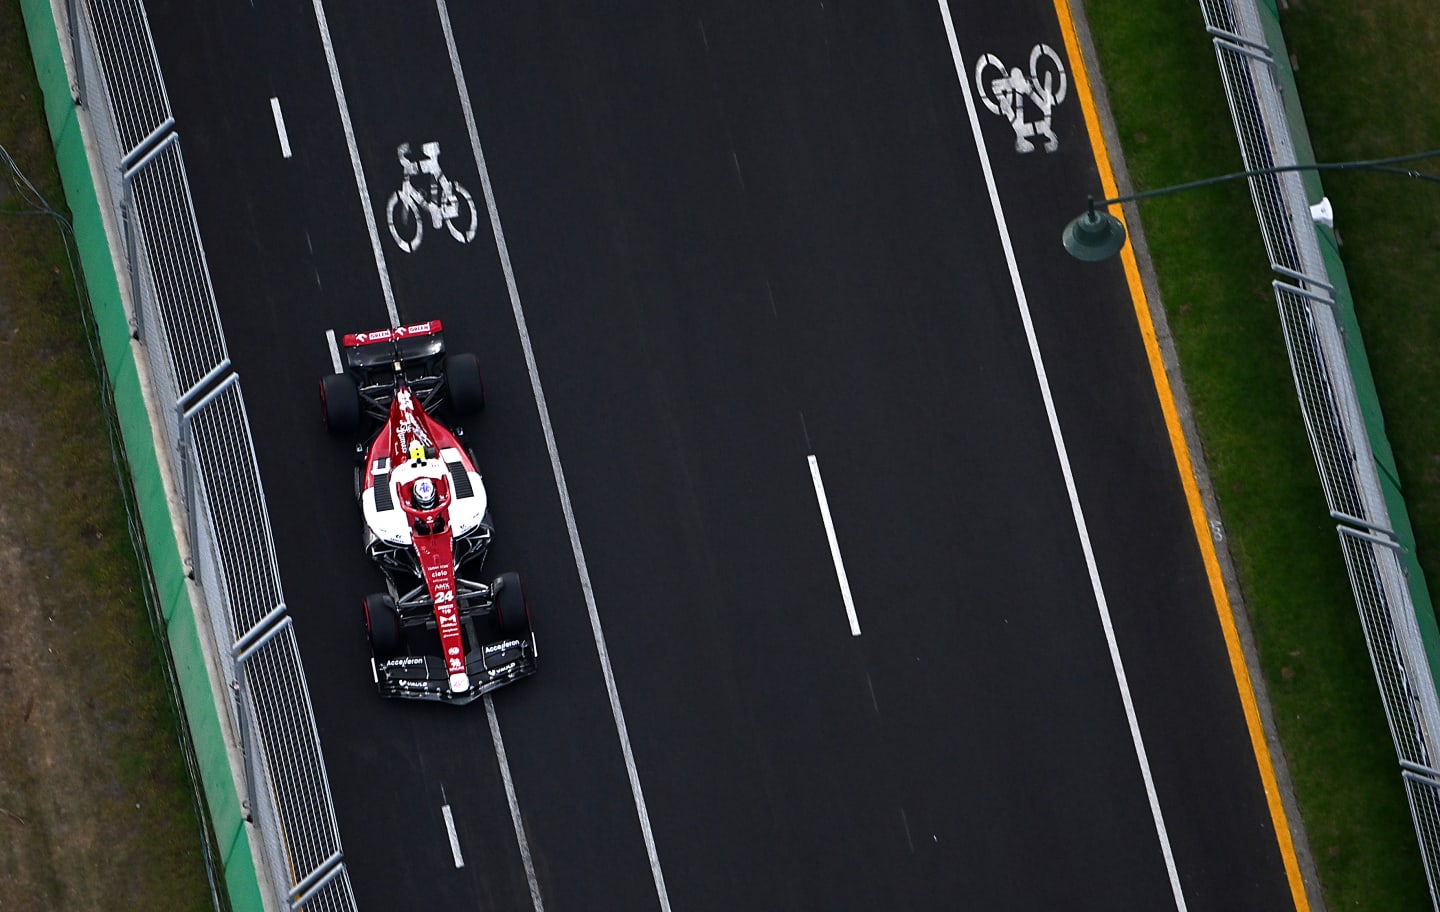 MELBOURNE, AUSTRALIA - APRIL 09: Zhou Guanyu of China driving the (24) Alfa Romeo F1 C42 Ferrari on track during qualifying ahead of the F1 Grand Prix of Australia at Melbourne Grand Prix Circuit on April 09, 2022 in Melbourne, Australia. (Photo by Clive Mason/Getty Images)